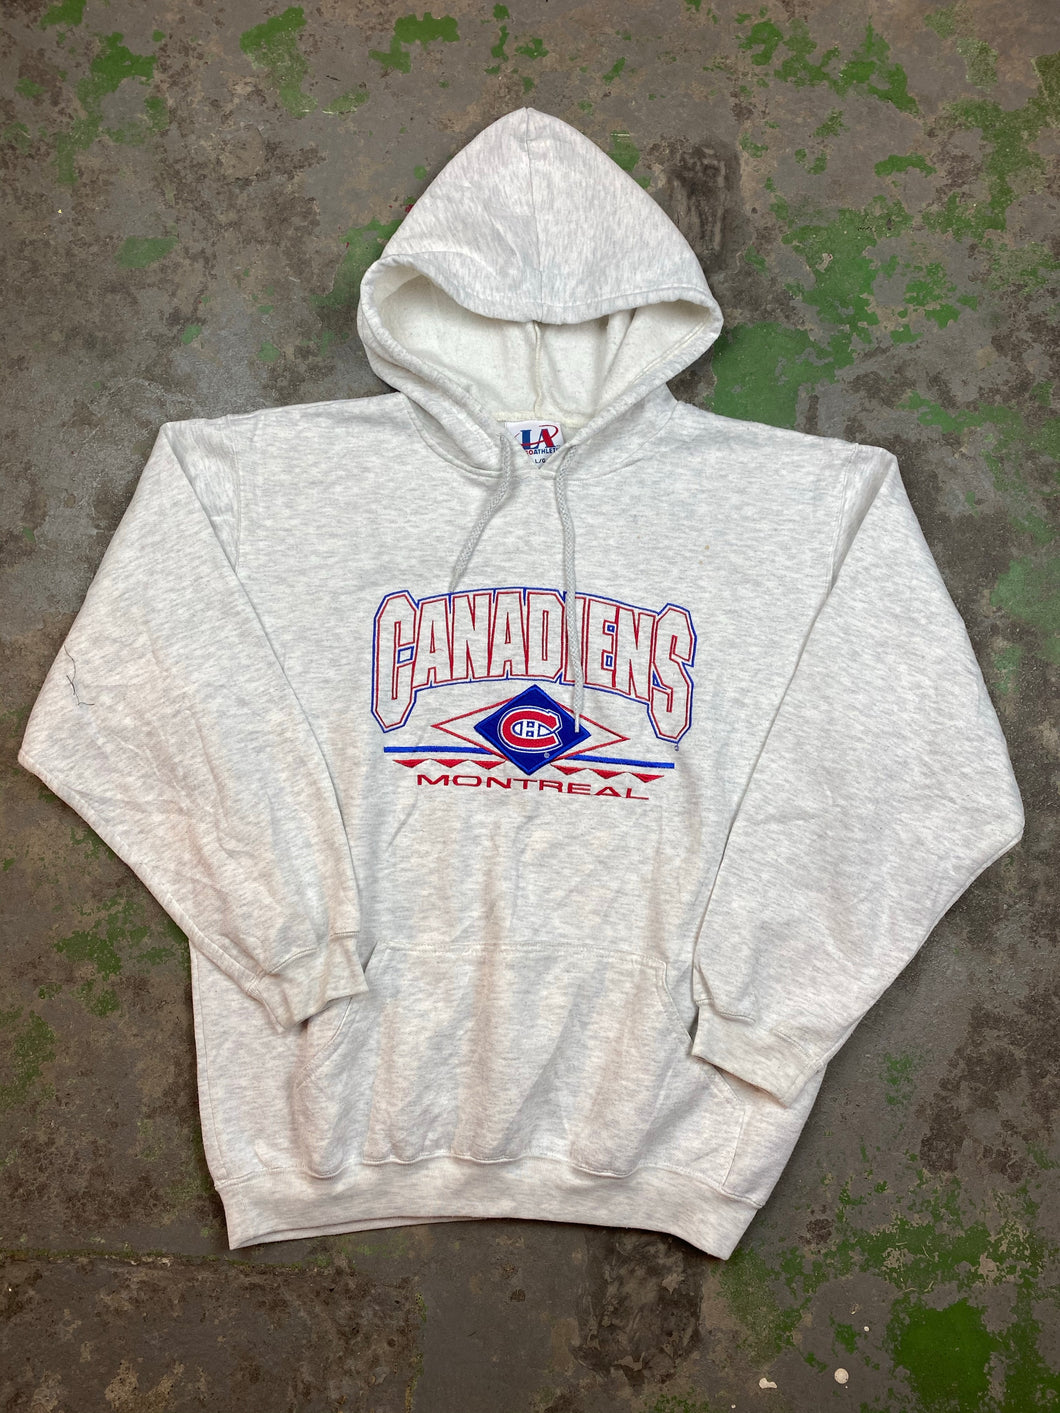 90s embroidered Canadians hoodie